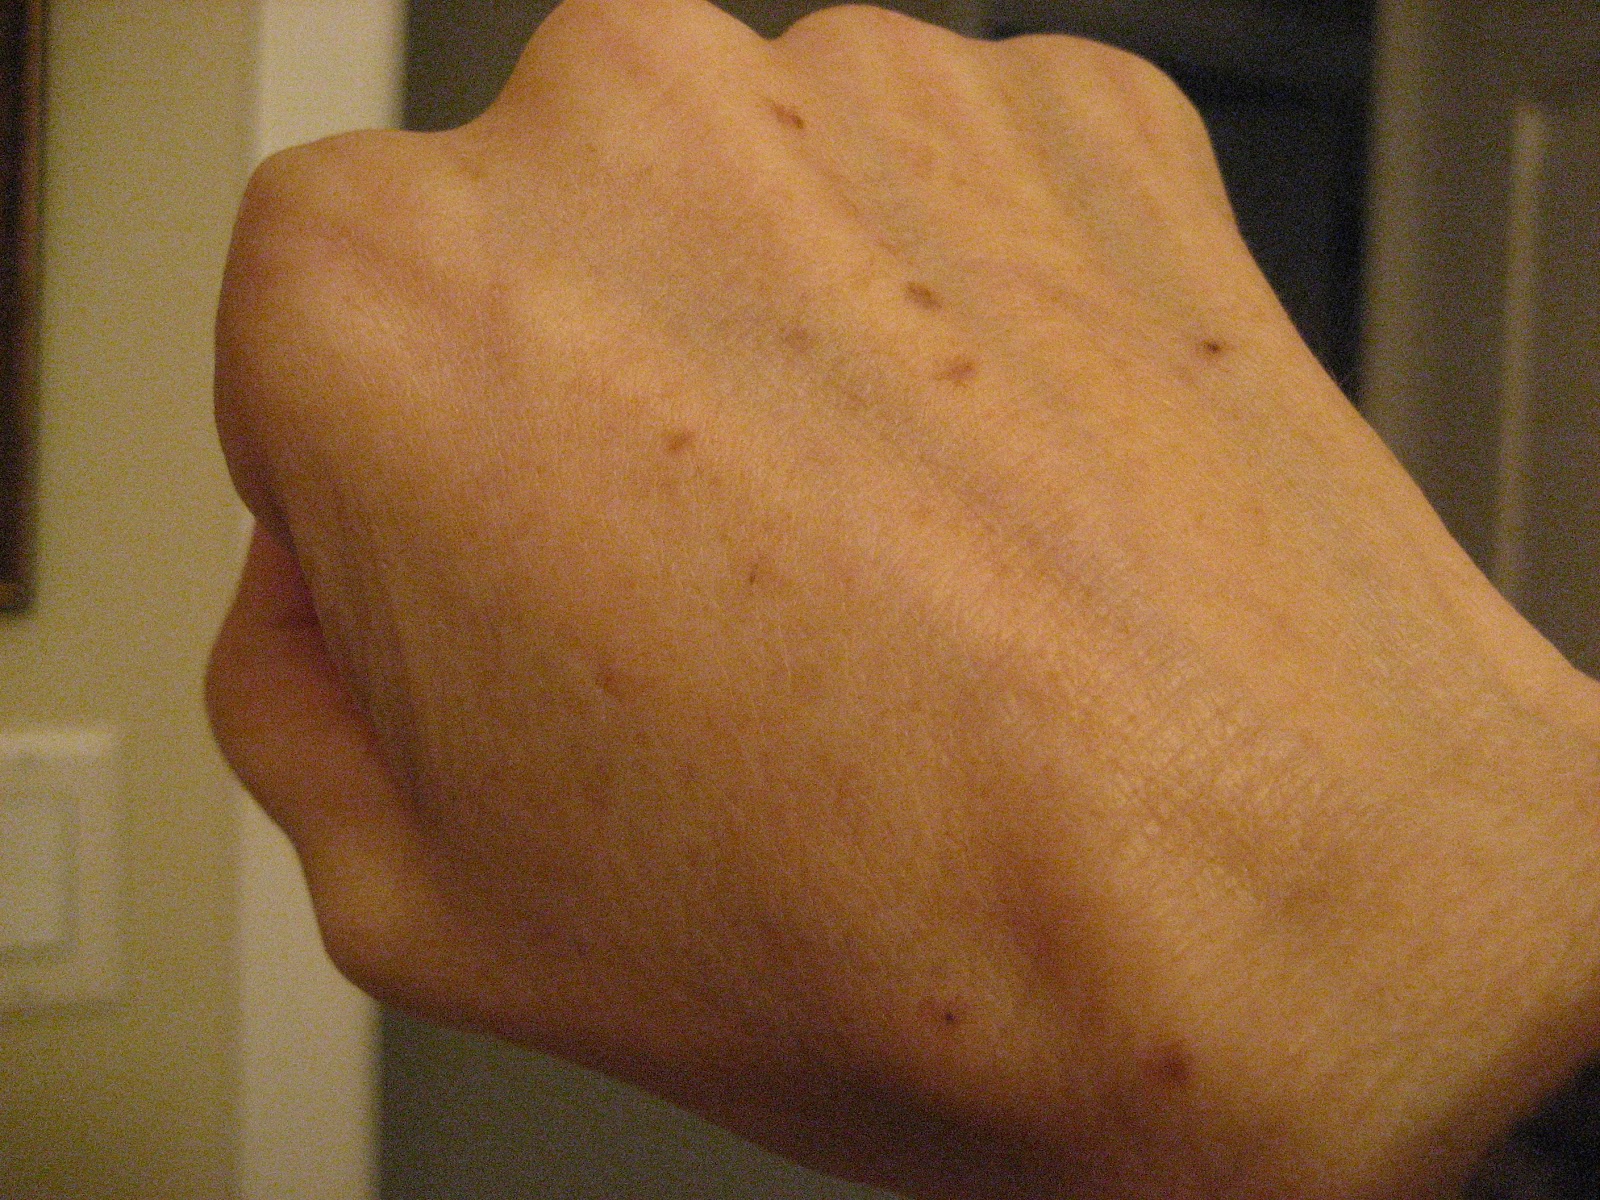  Spots On Hands Chemical peels for acne and anti aging: hand age spots